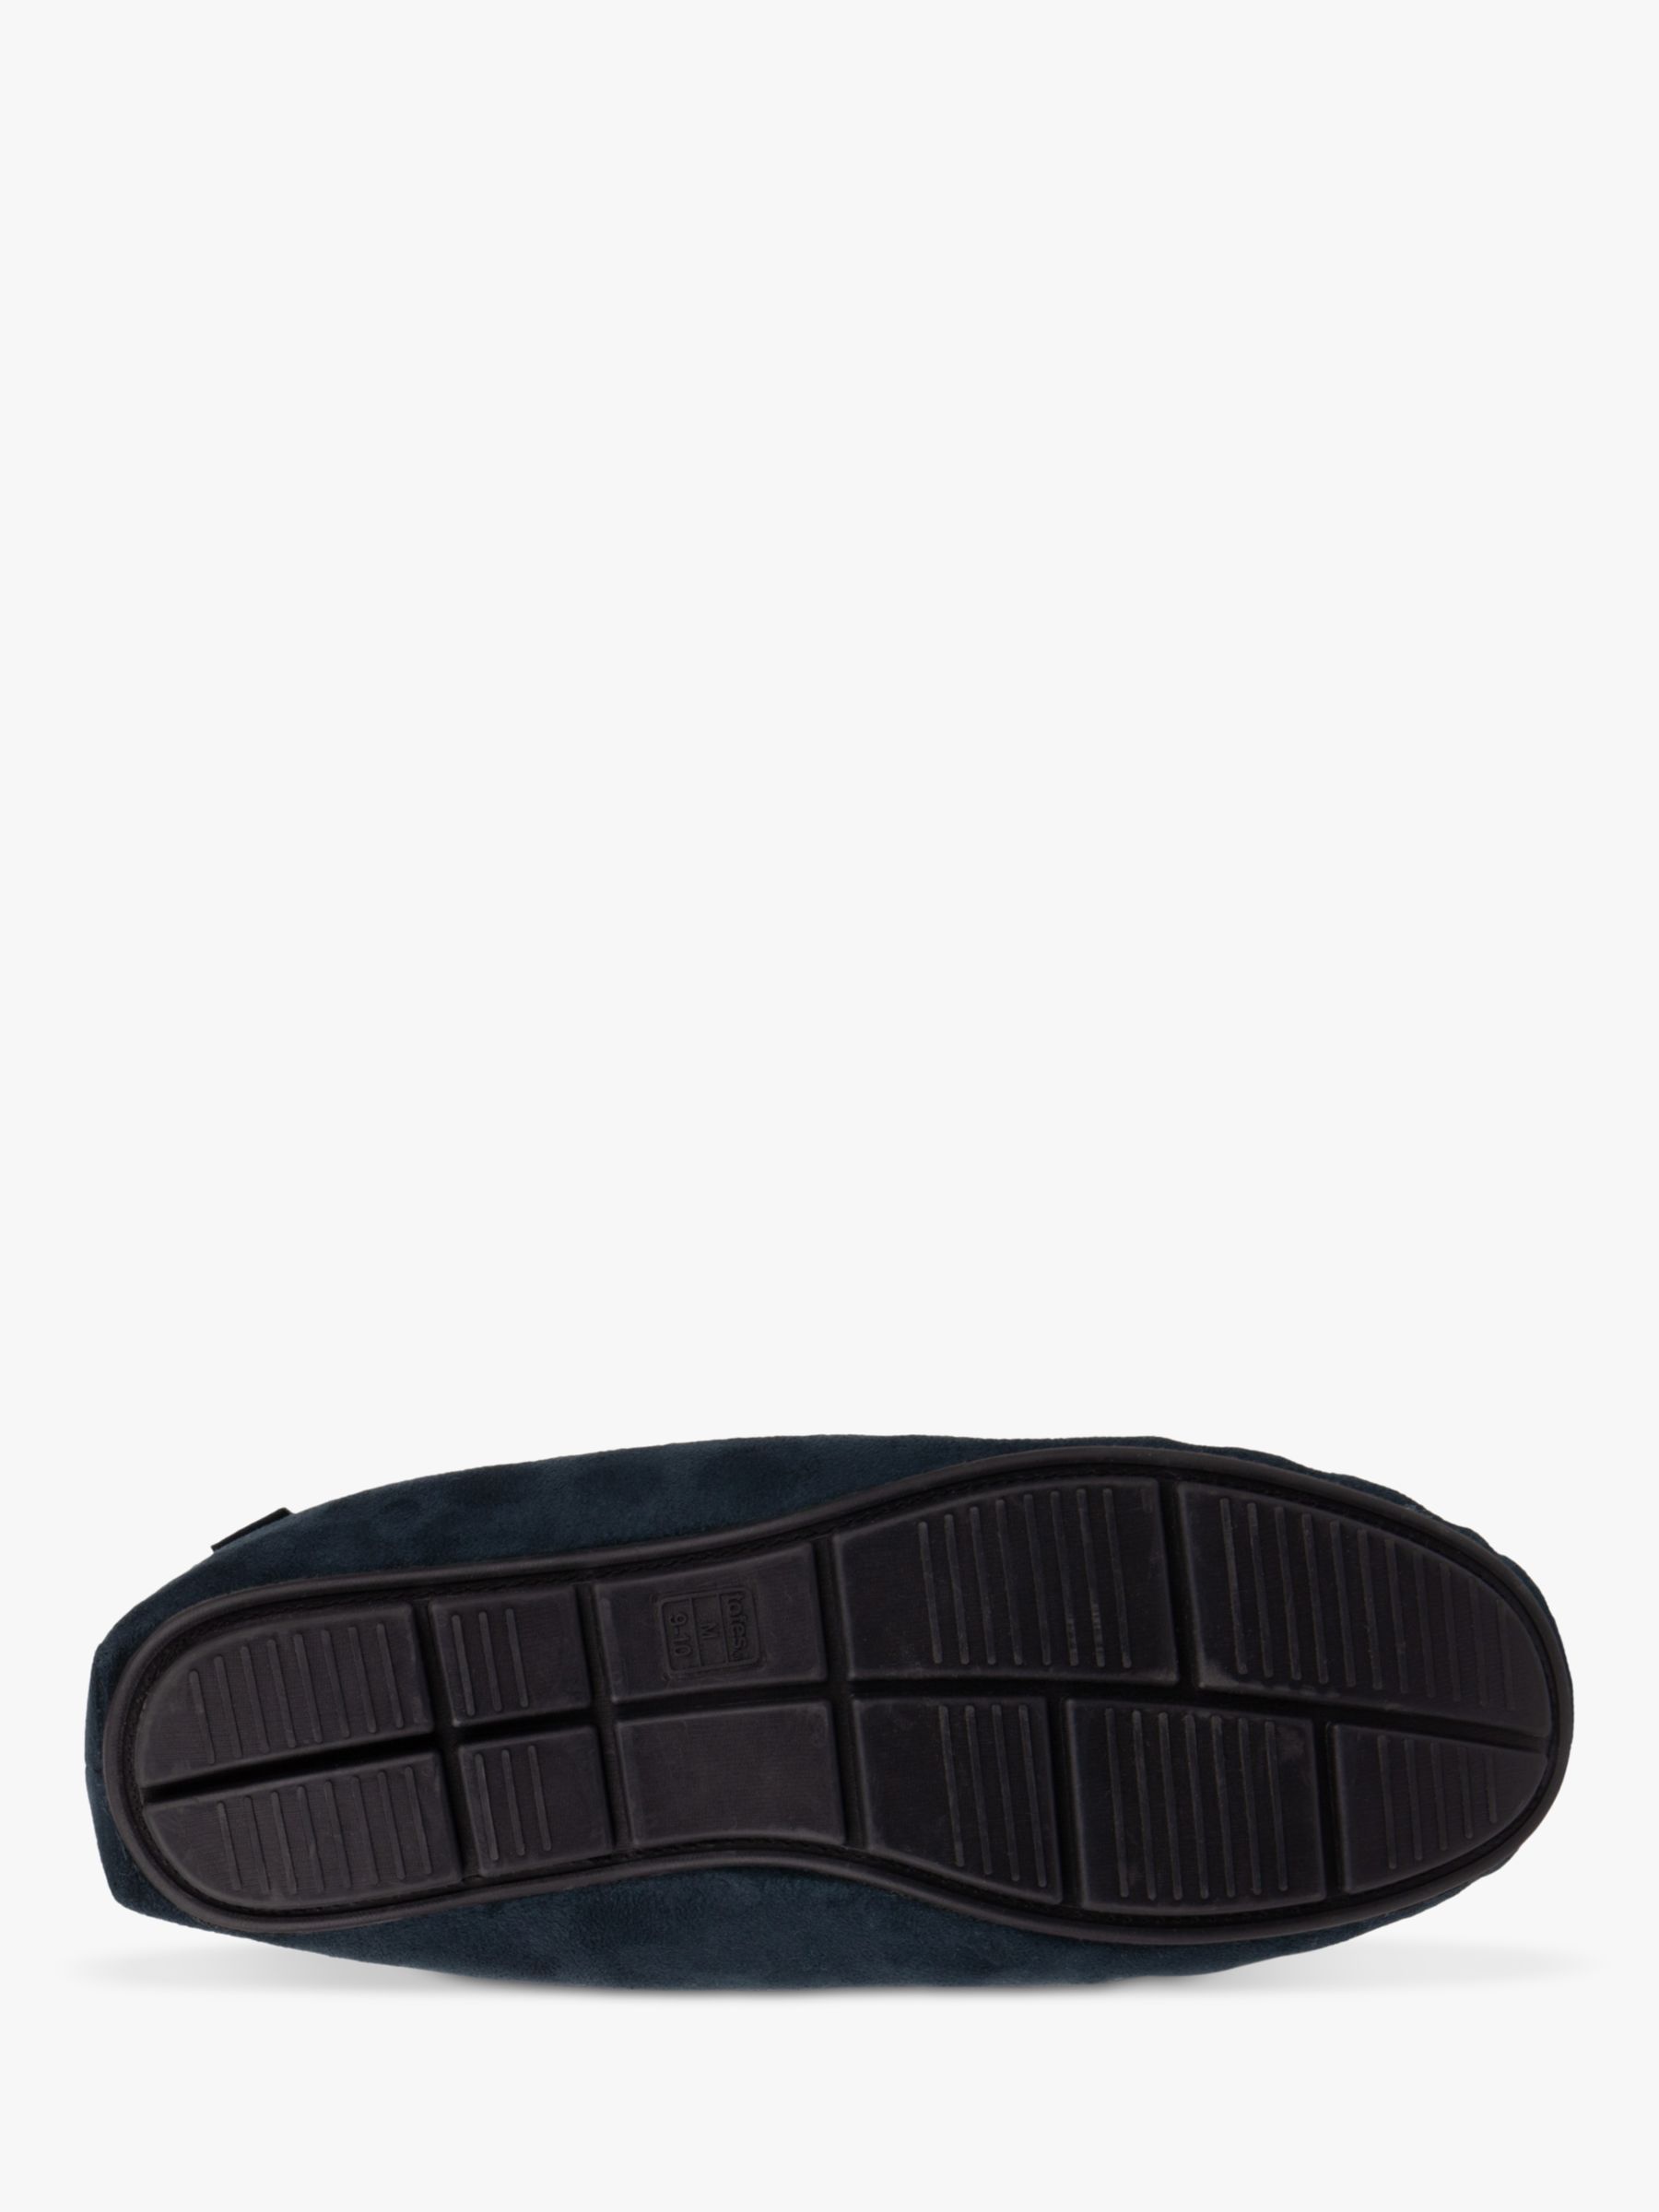 Buy totes Moccasin Style Faux Fur Lining Slippers, Navy Online at johnlewis.com